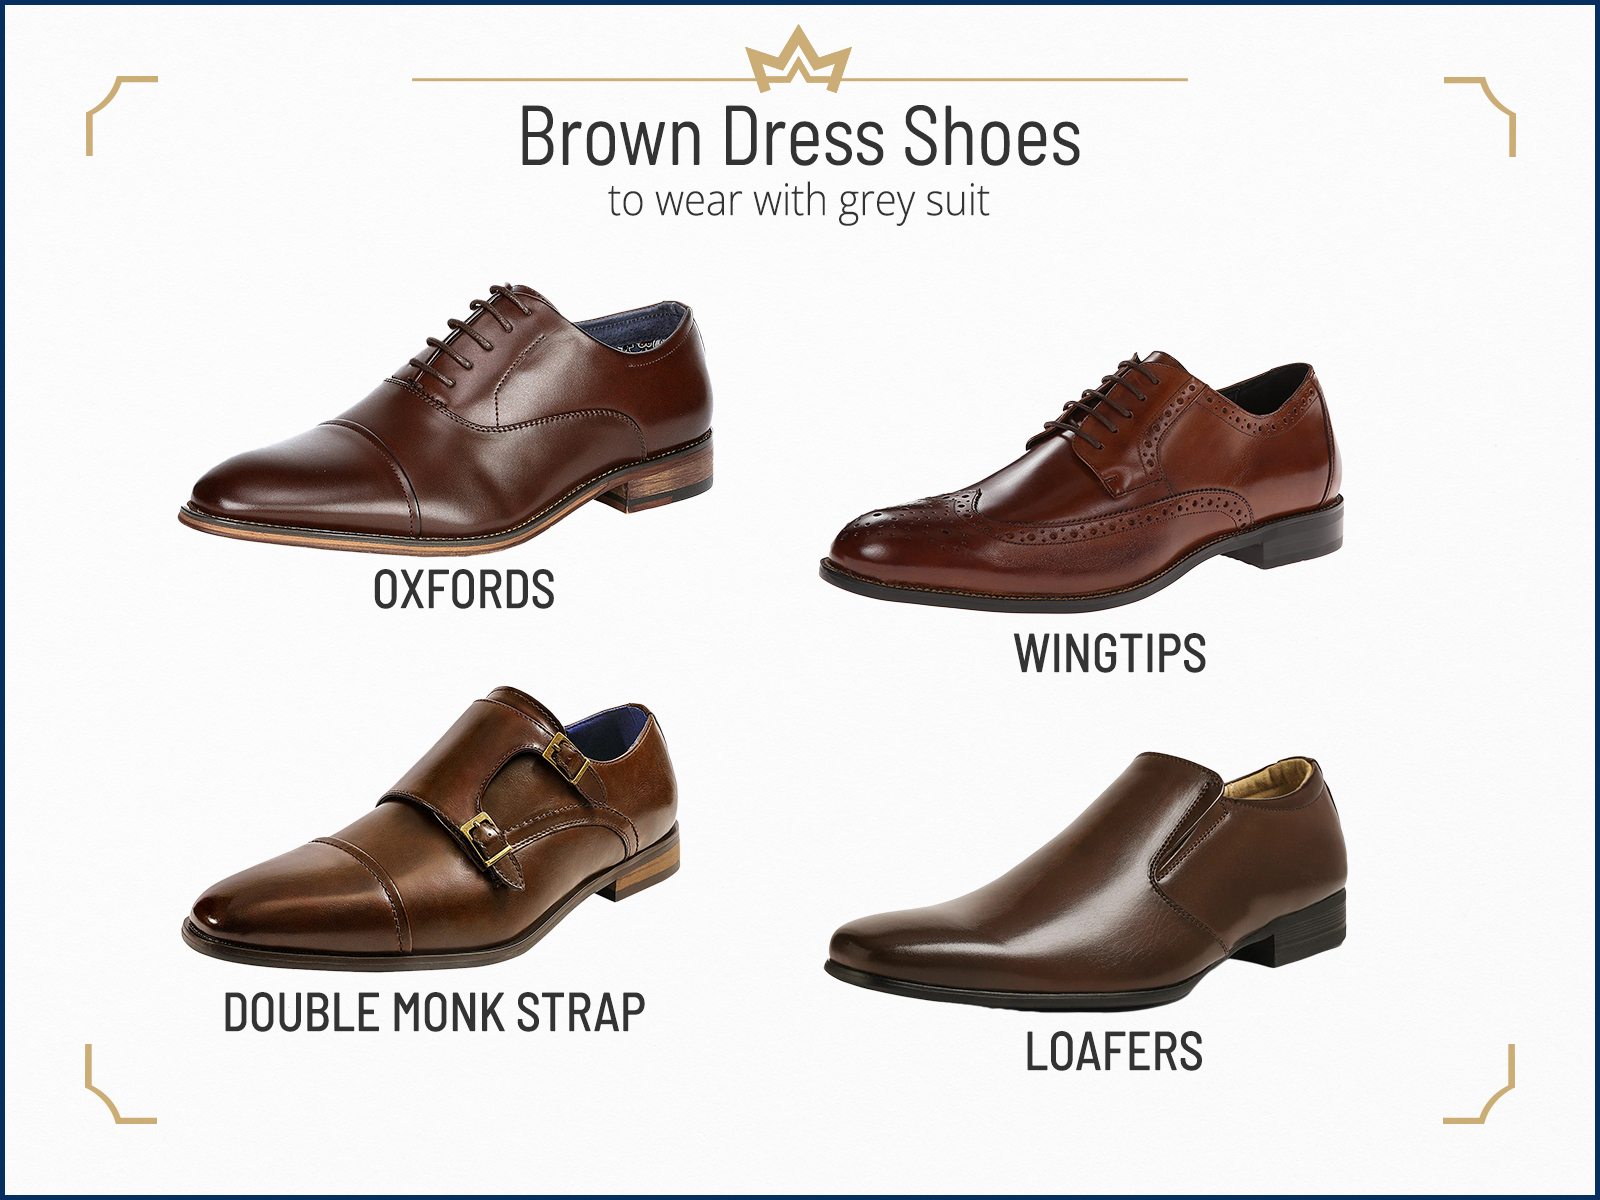 Recommended brown dress shoe types for grey suits